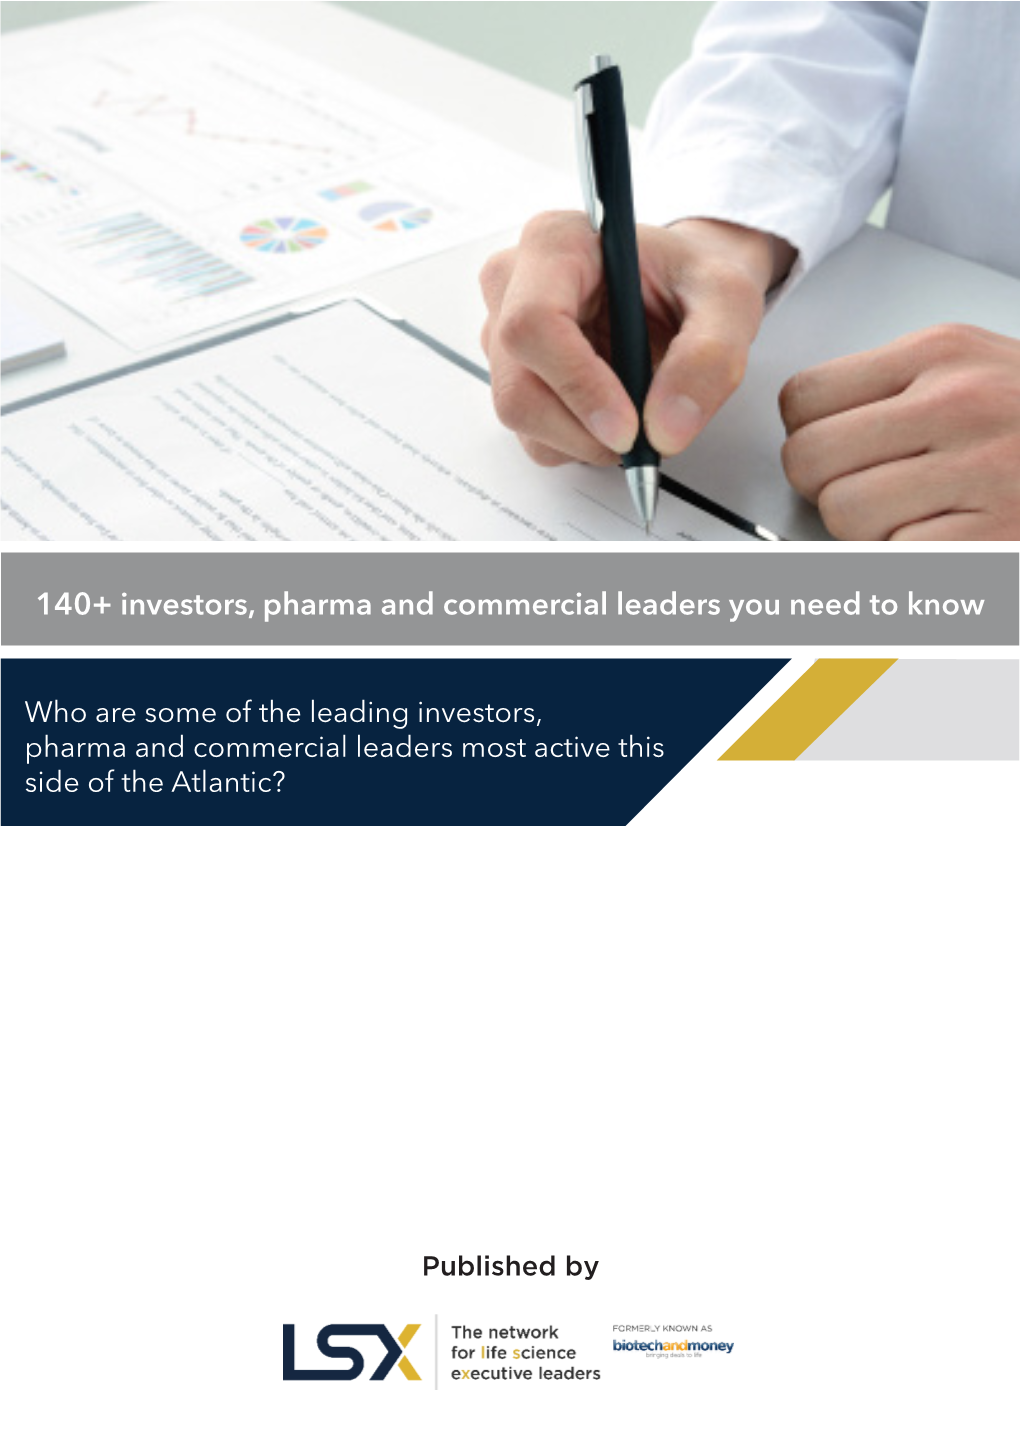 140+ Investors, Pharma and Commercial Leaders You Need to Know